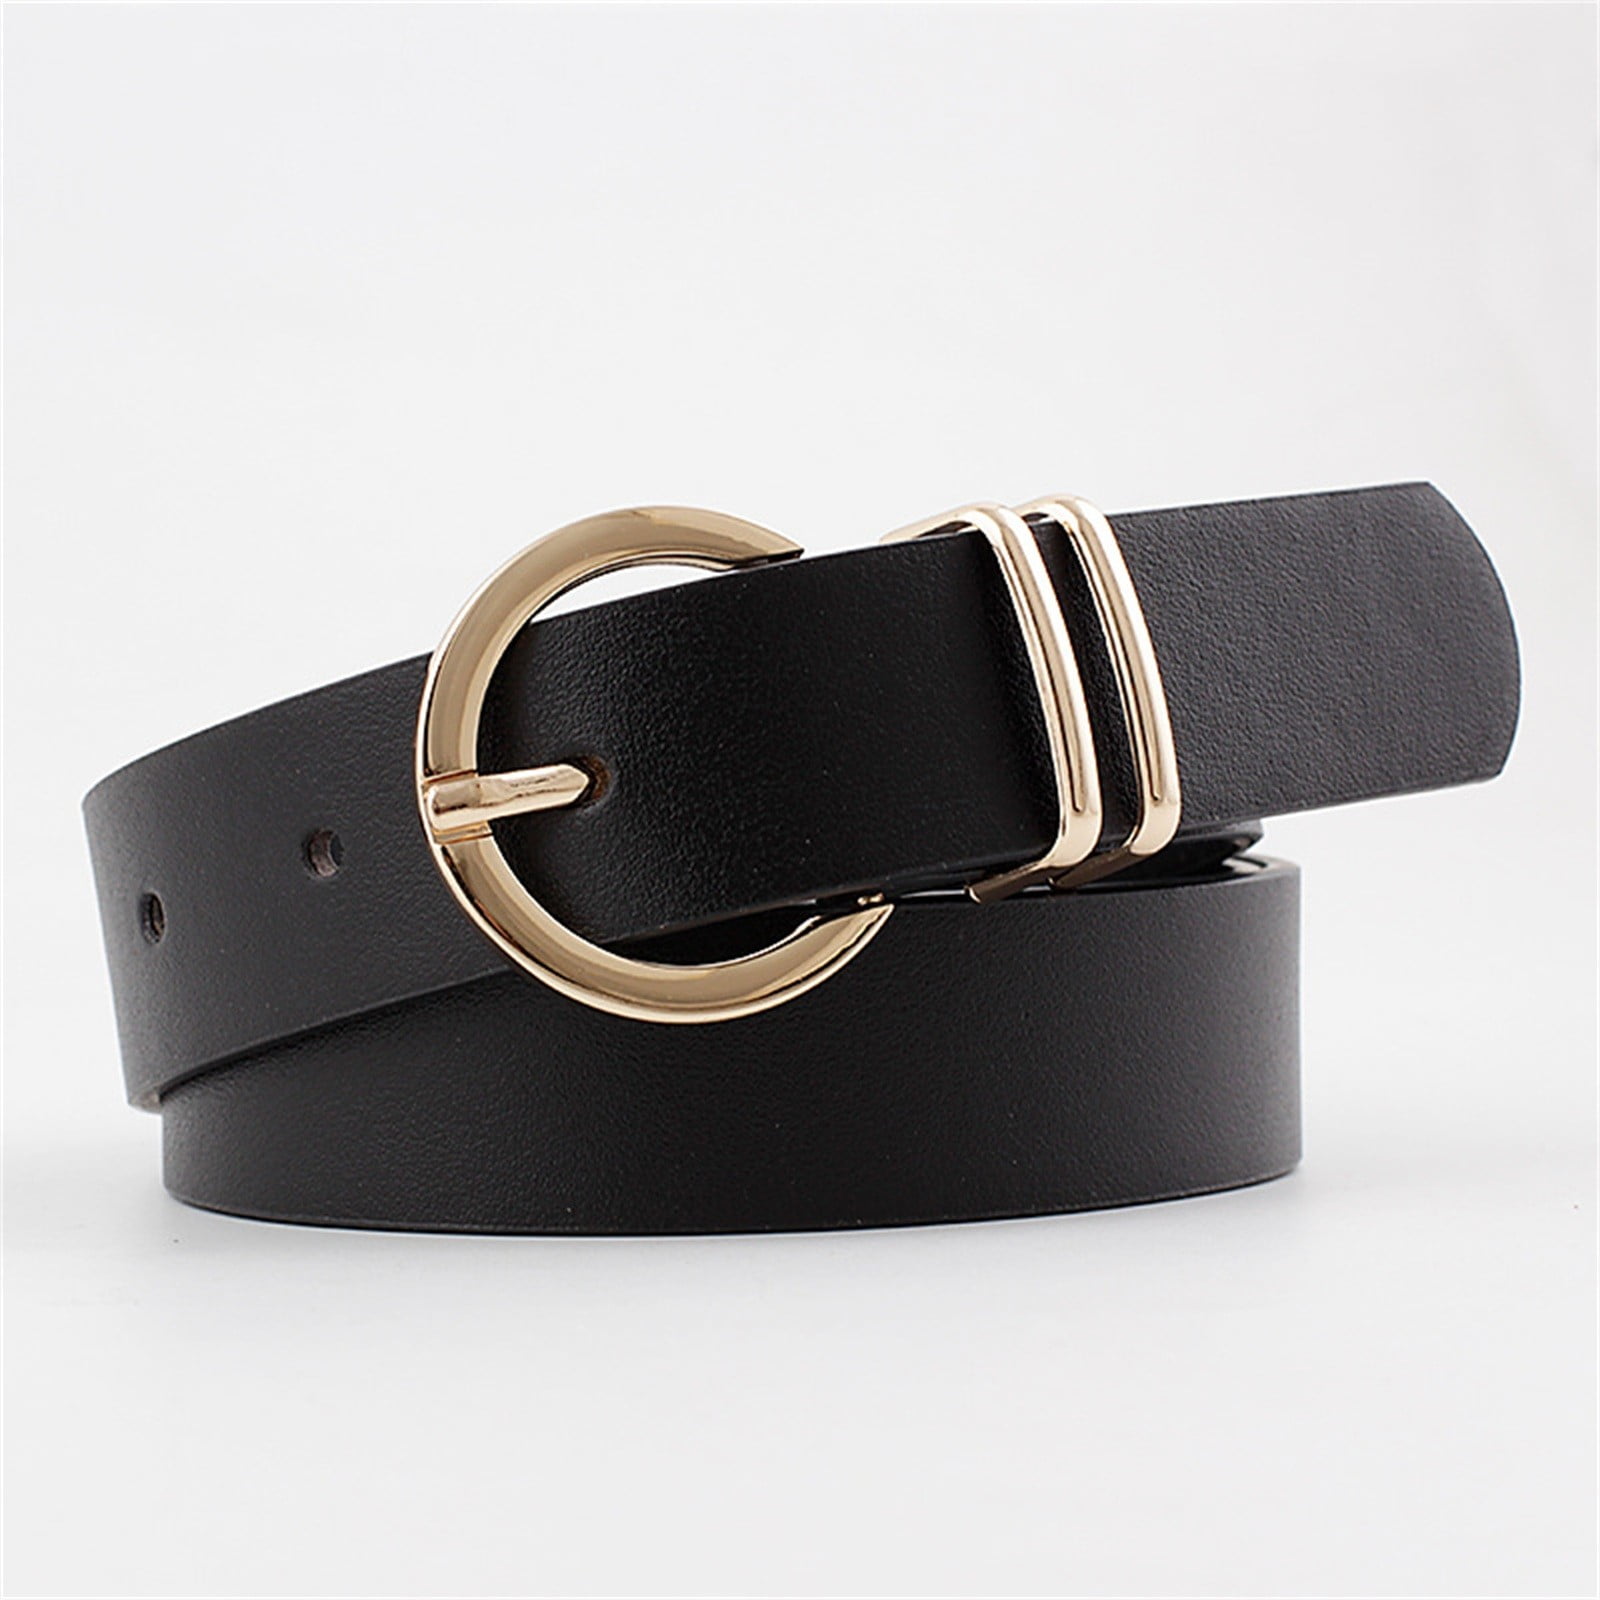 CBGELRT Women's Leather Belts for Jeans Dress with Gold Pin Buckle